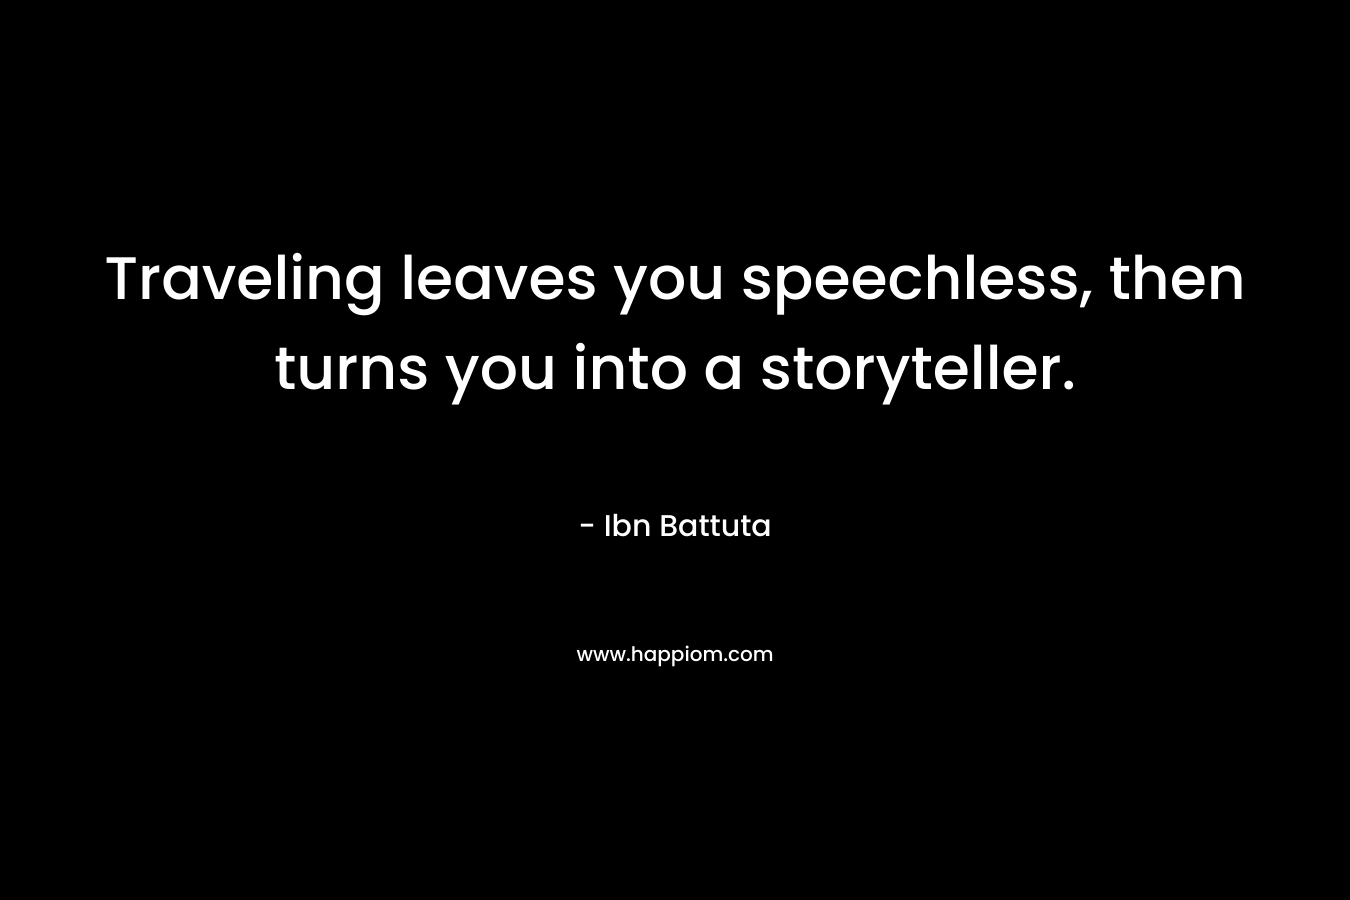 Traveling leaves you speechless, then turns you into a storyteller.